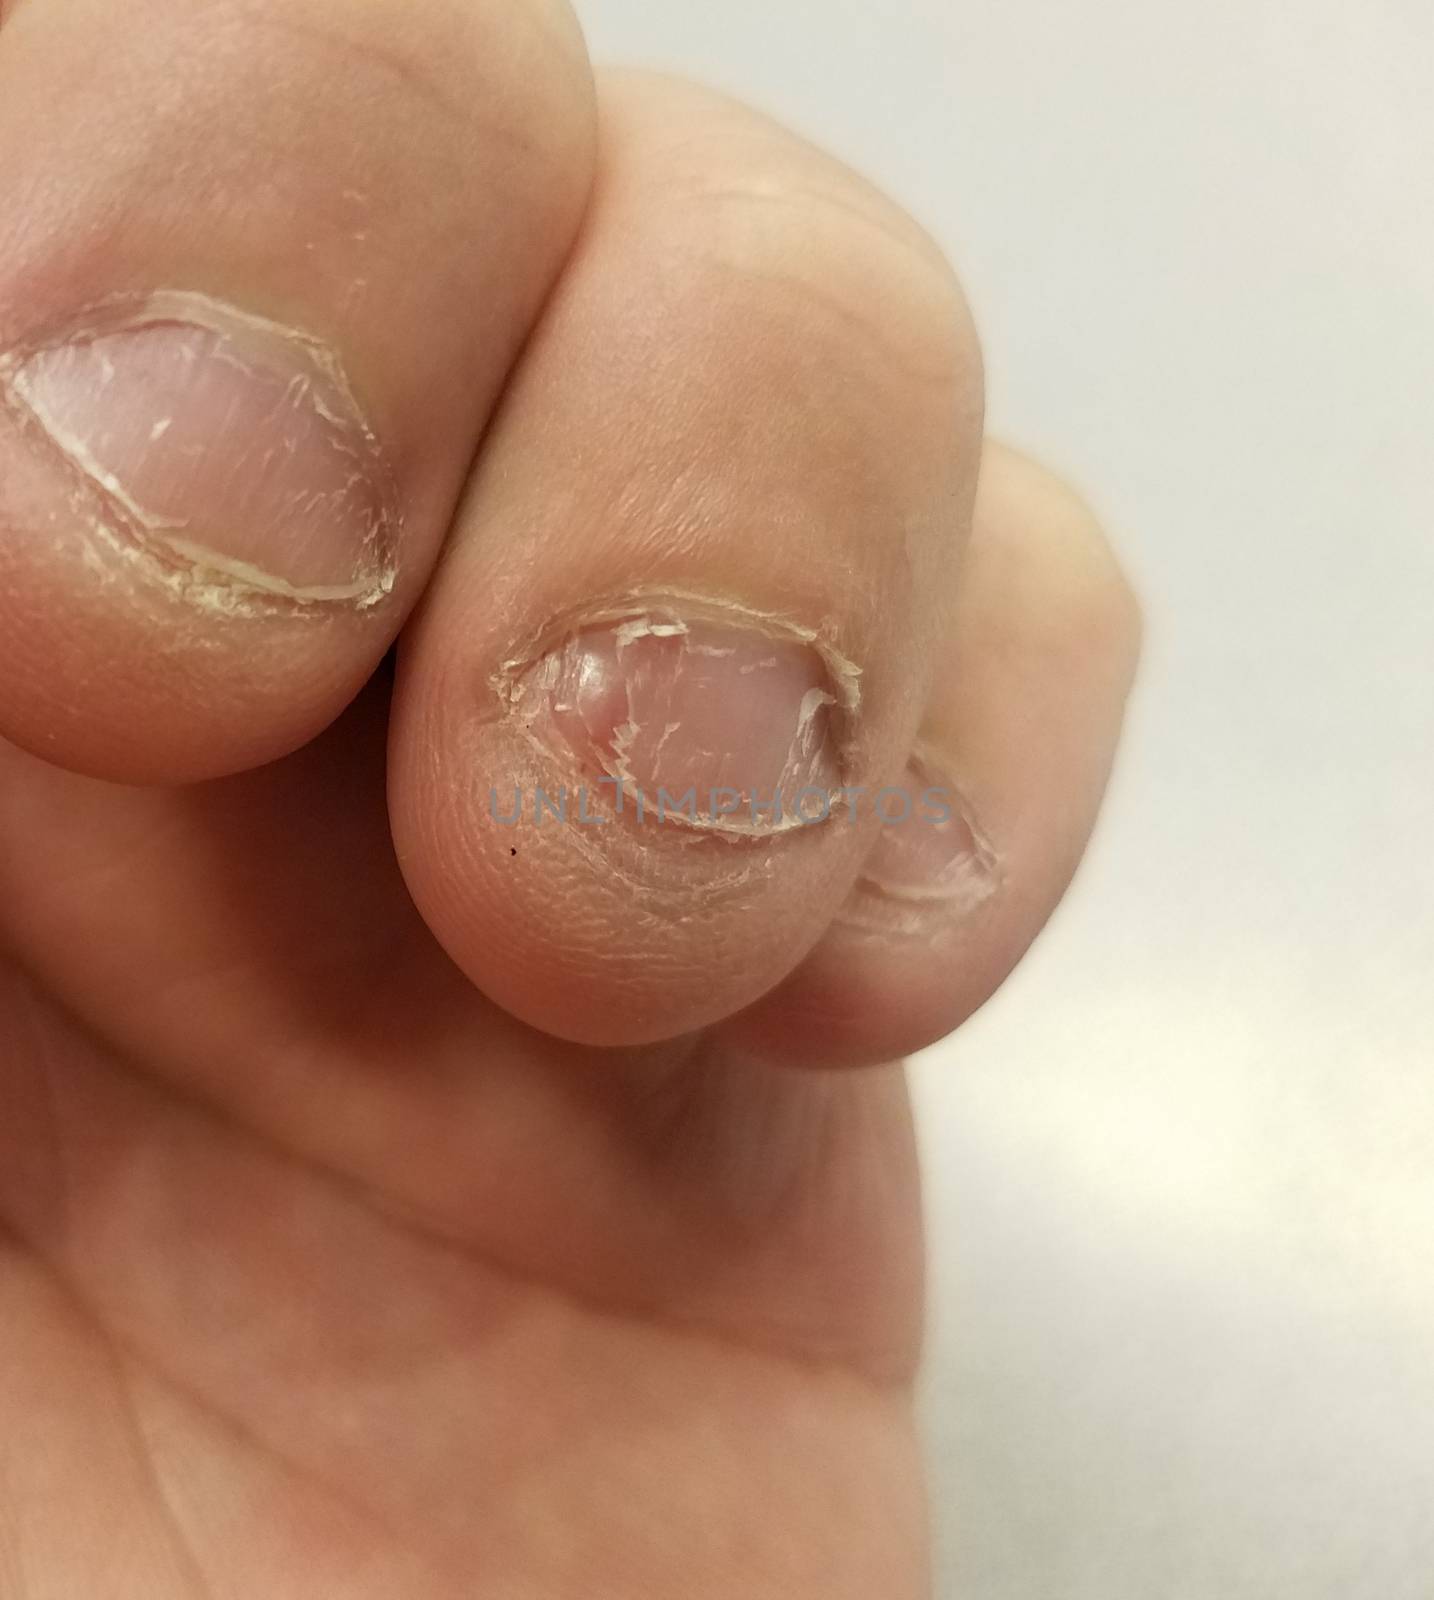 disgusting and gross bitten fingernail and fingers on hand